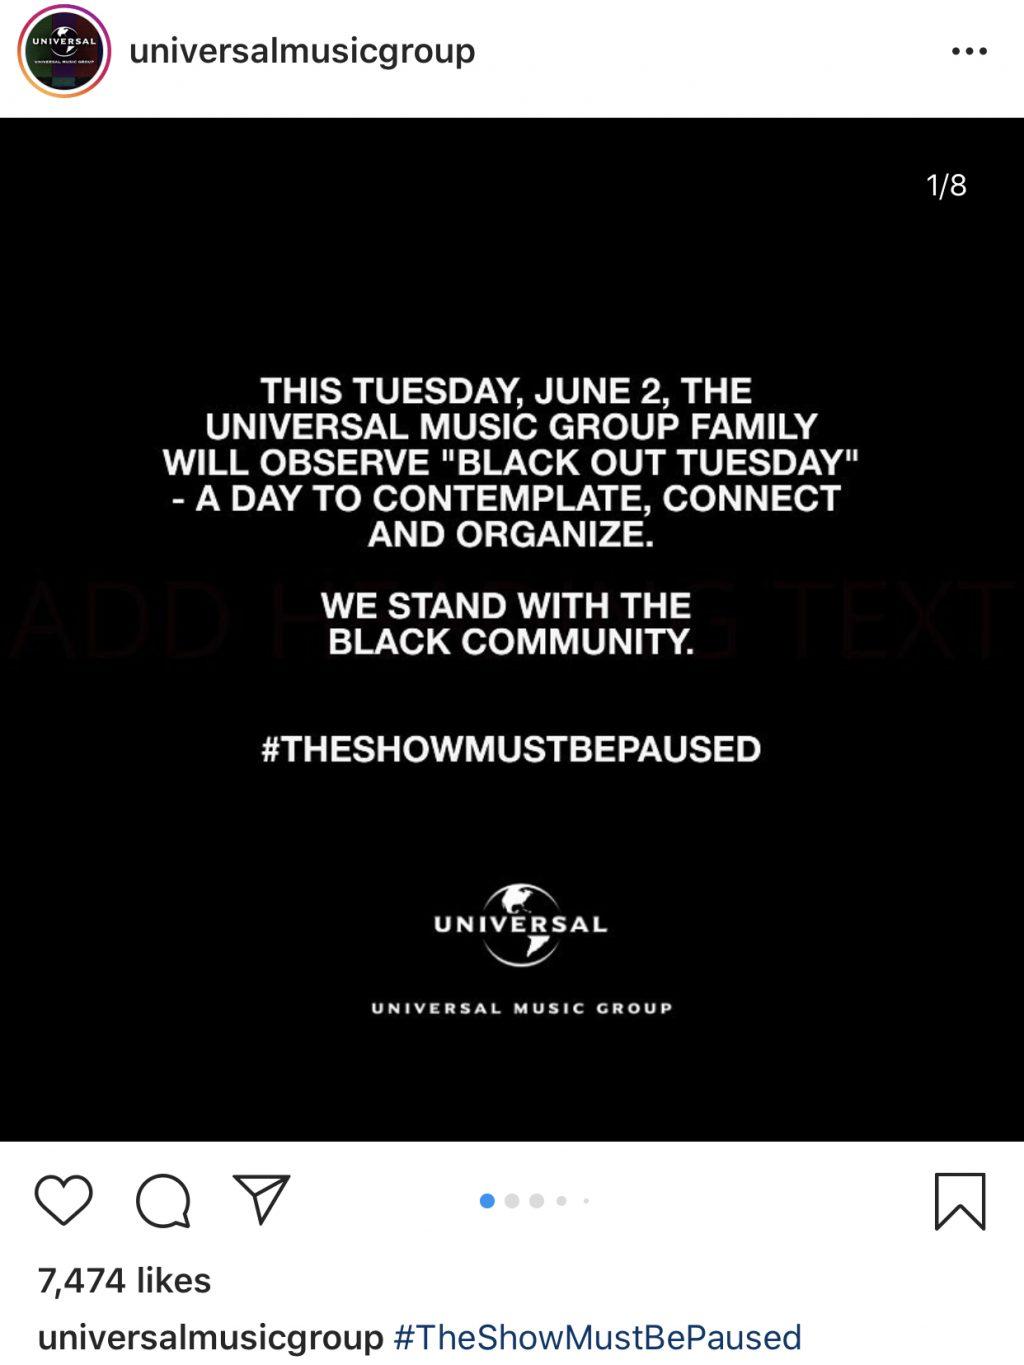 Universal Music Group observes "Black Out Tuesday" on June 2. The campaign was created to show solidarity and promote awareness of the injustices faced by the Black community following the death of George Floyd. Photo courtesy of Instagram